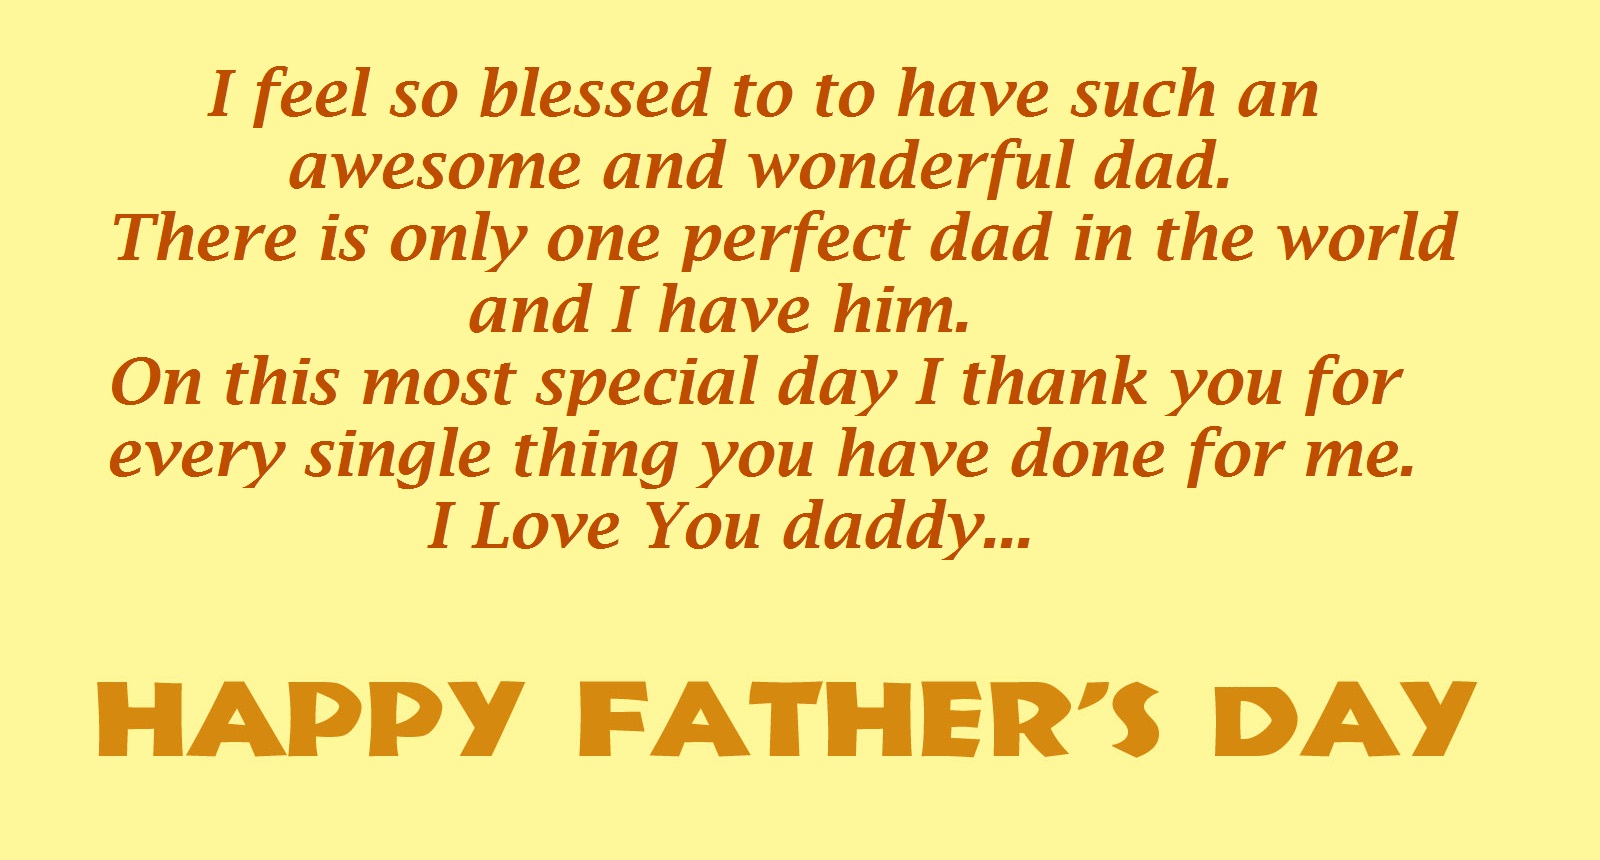 happy fathers day 2017 image